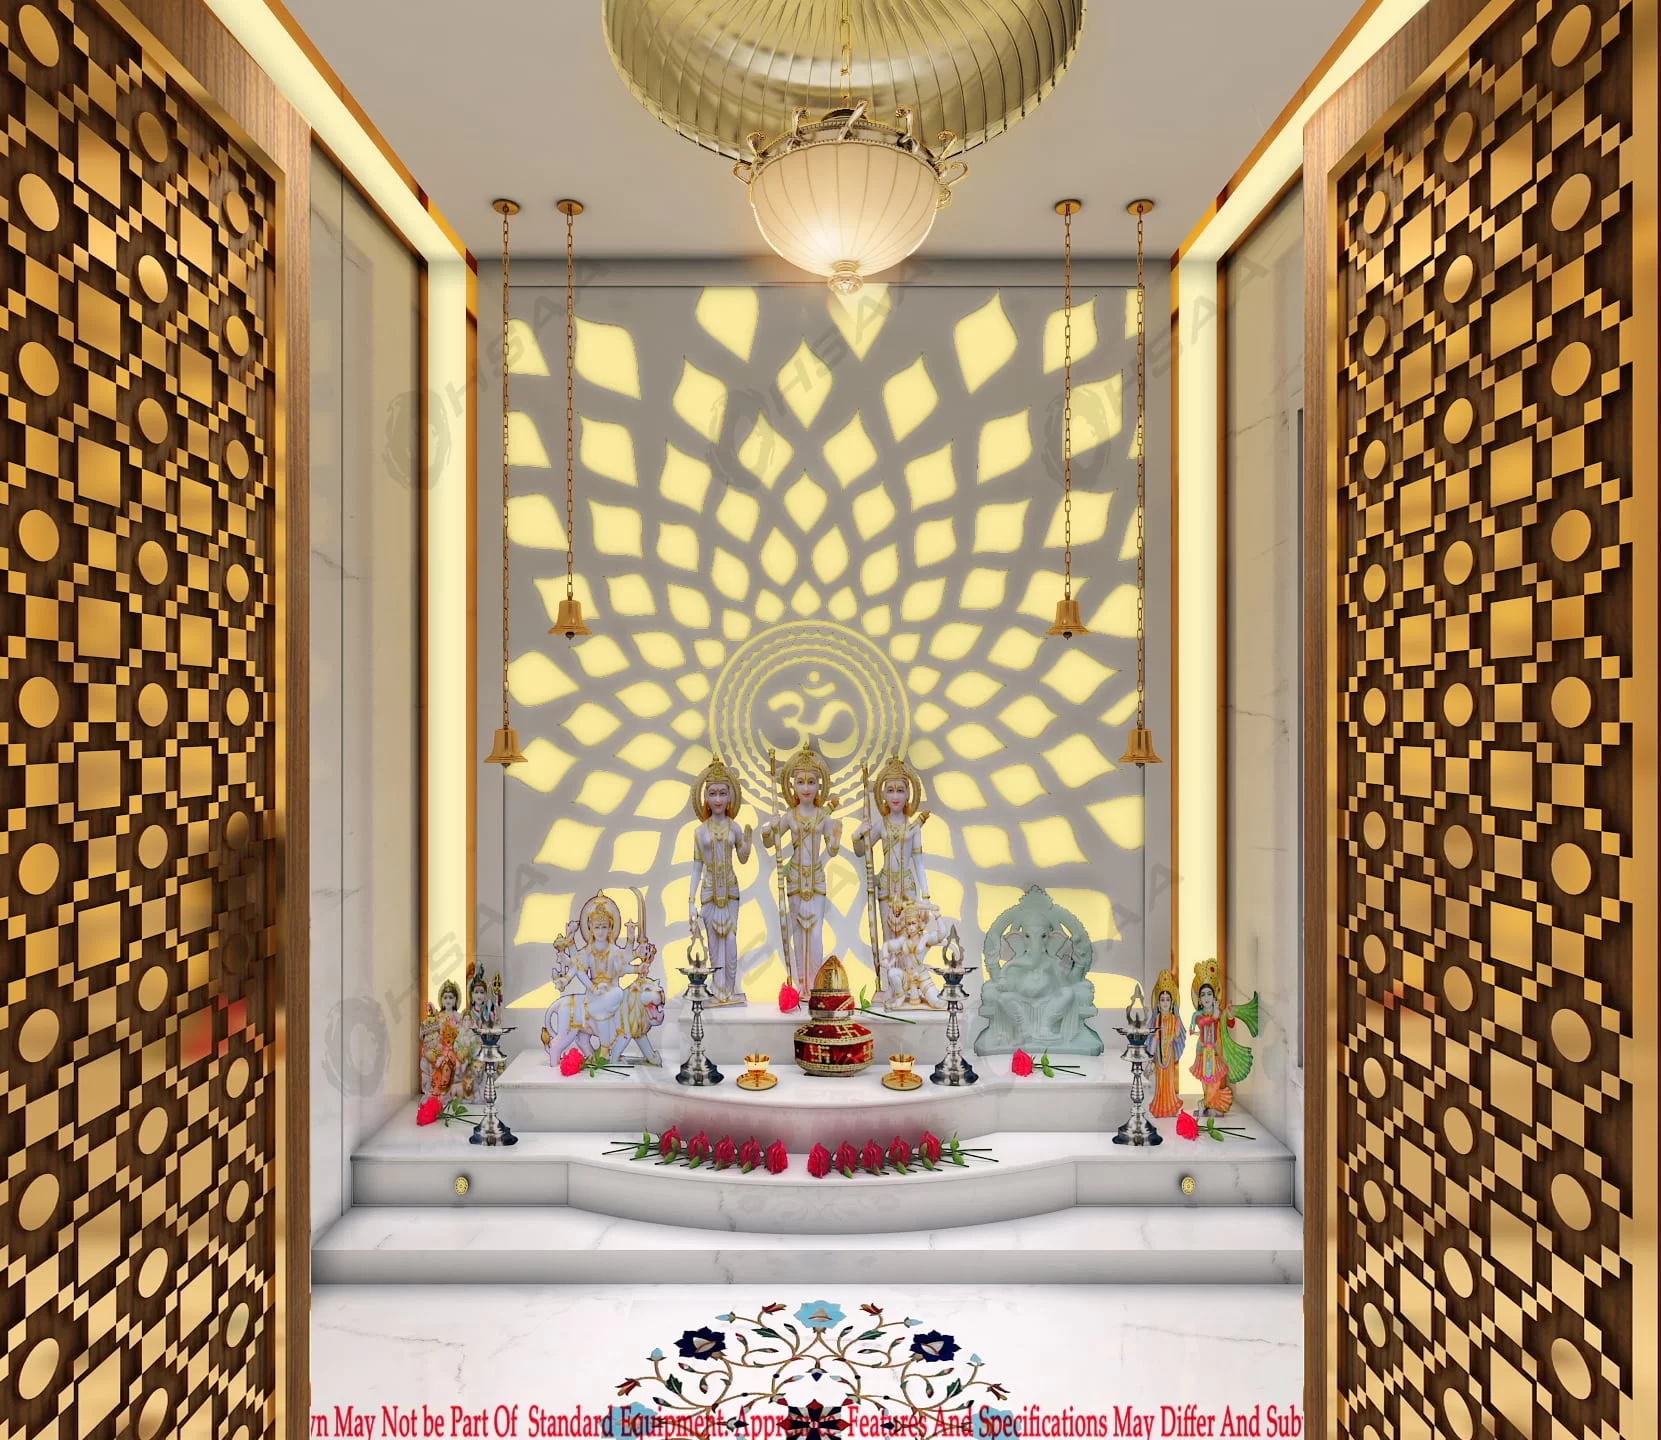 Worship Room interior designs for Indian Homes